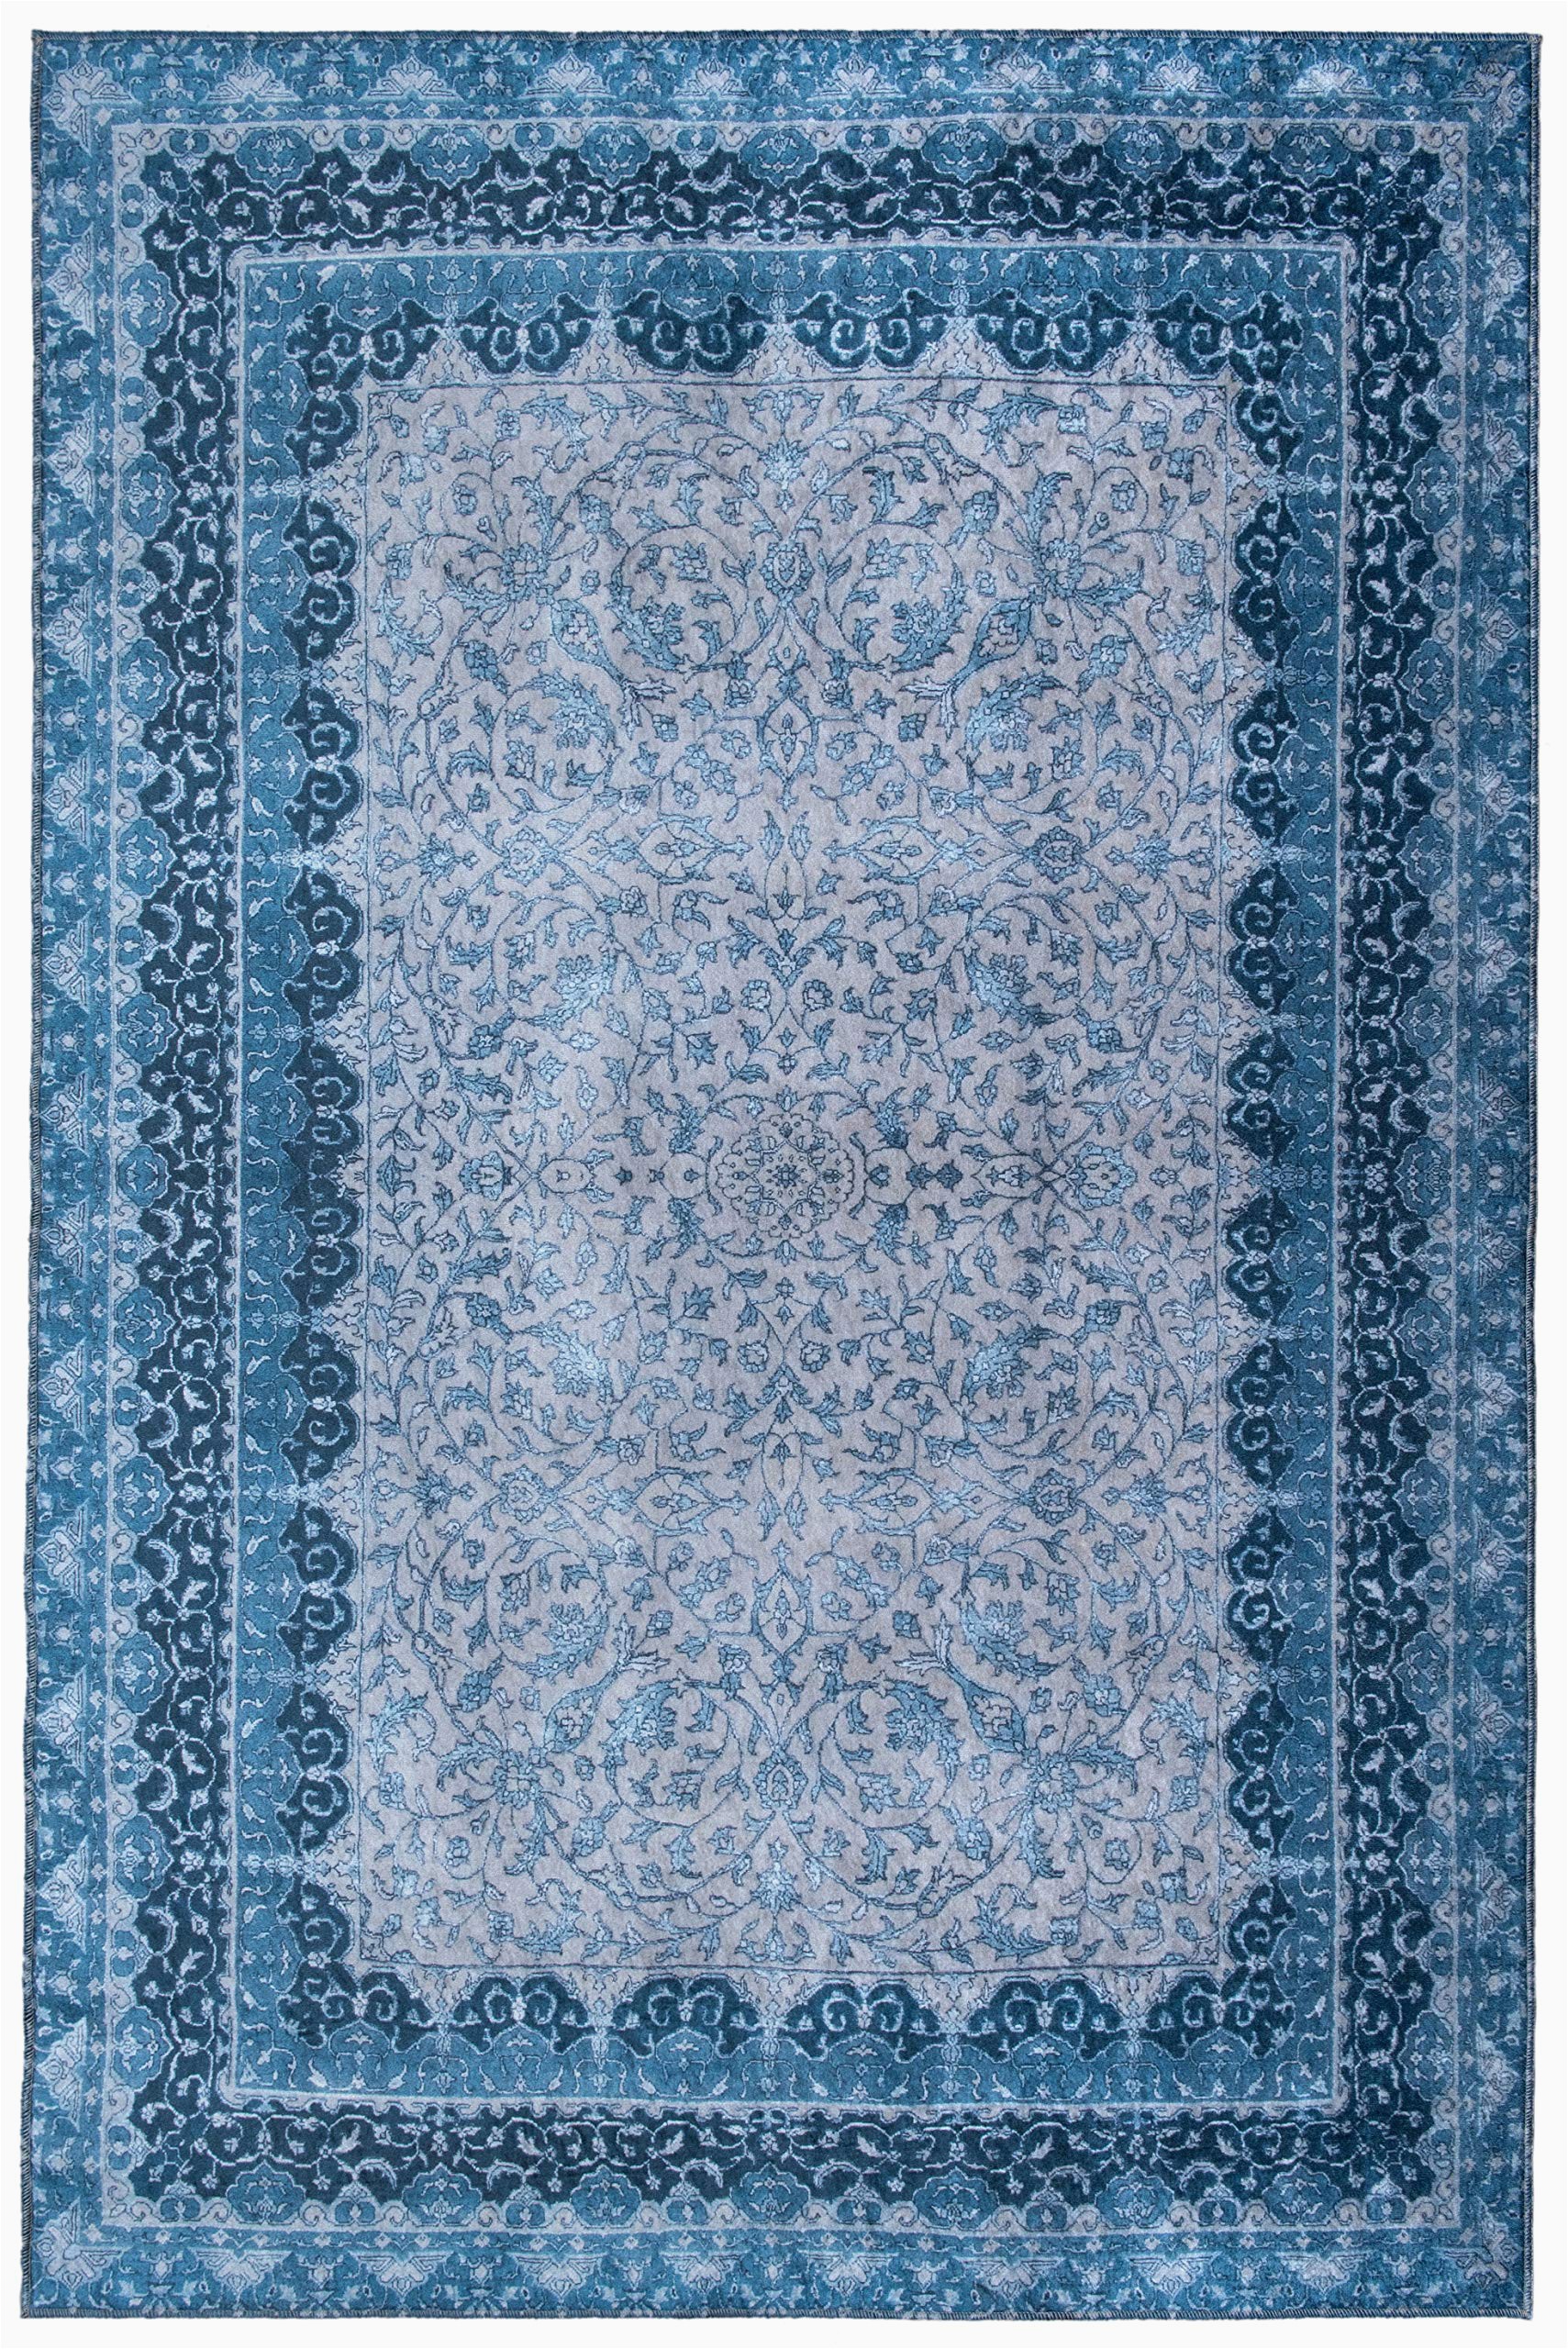 Non Skid Washable area Rugs Mylife Rugs Traditional Vintage Non Slip Machine Washable Printed area Rug Blue Grey 5 X7